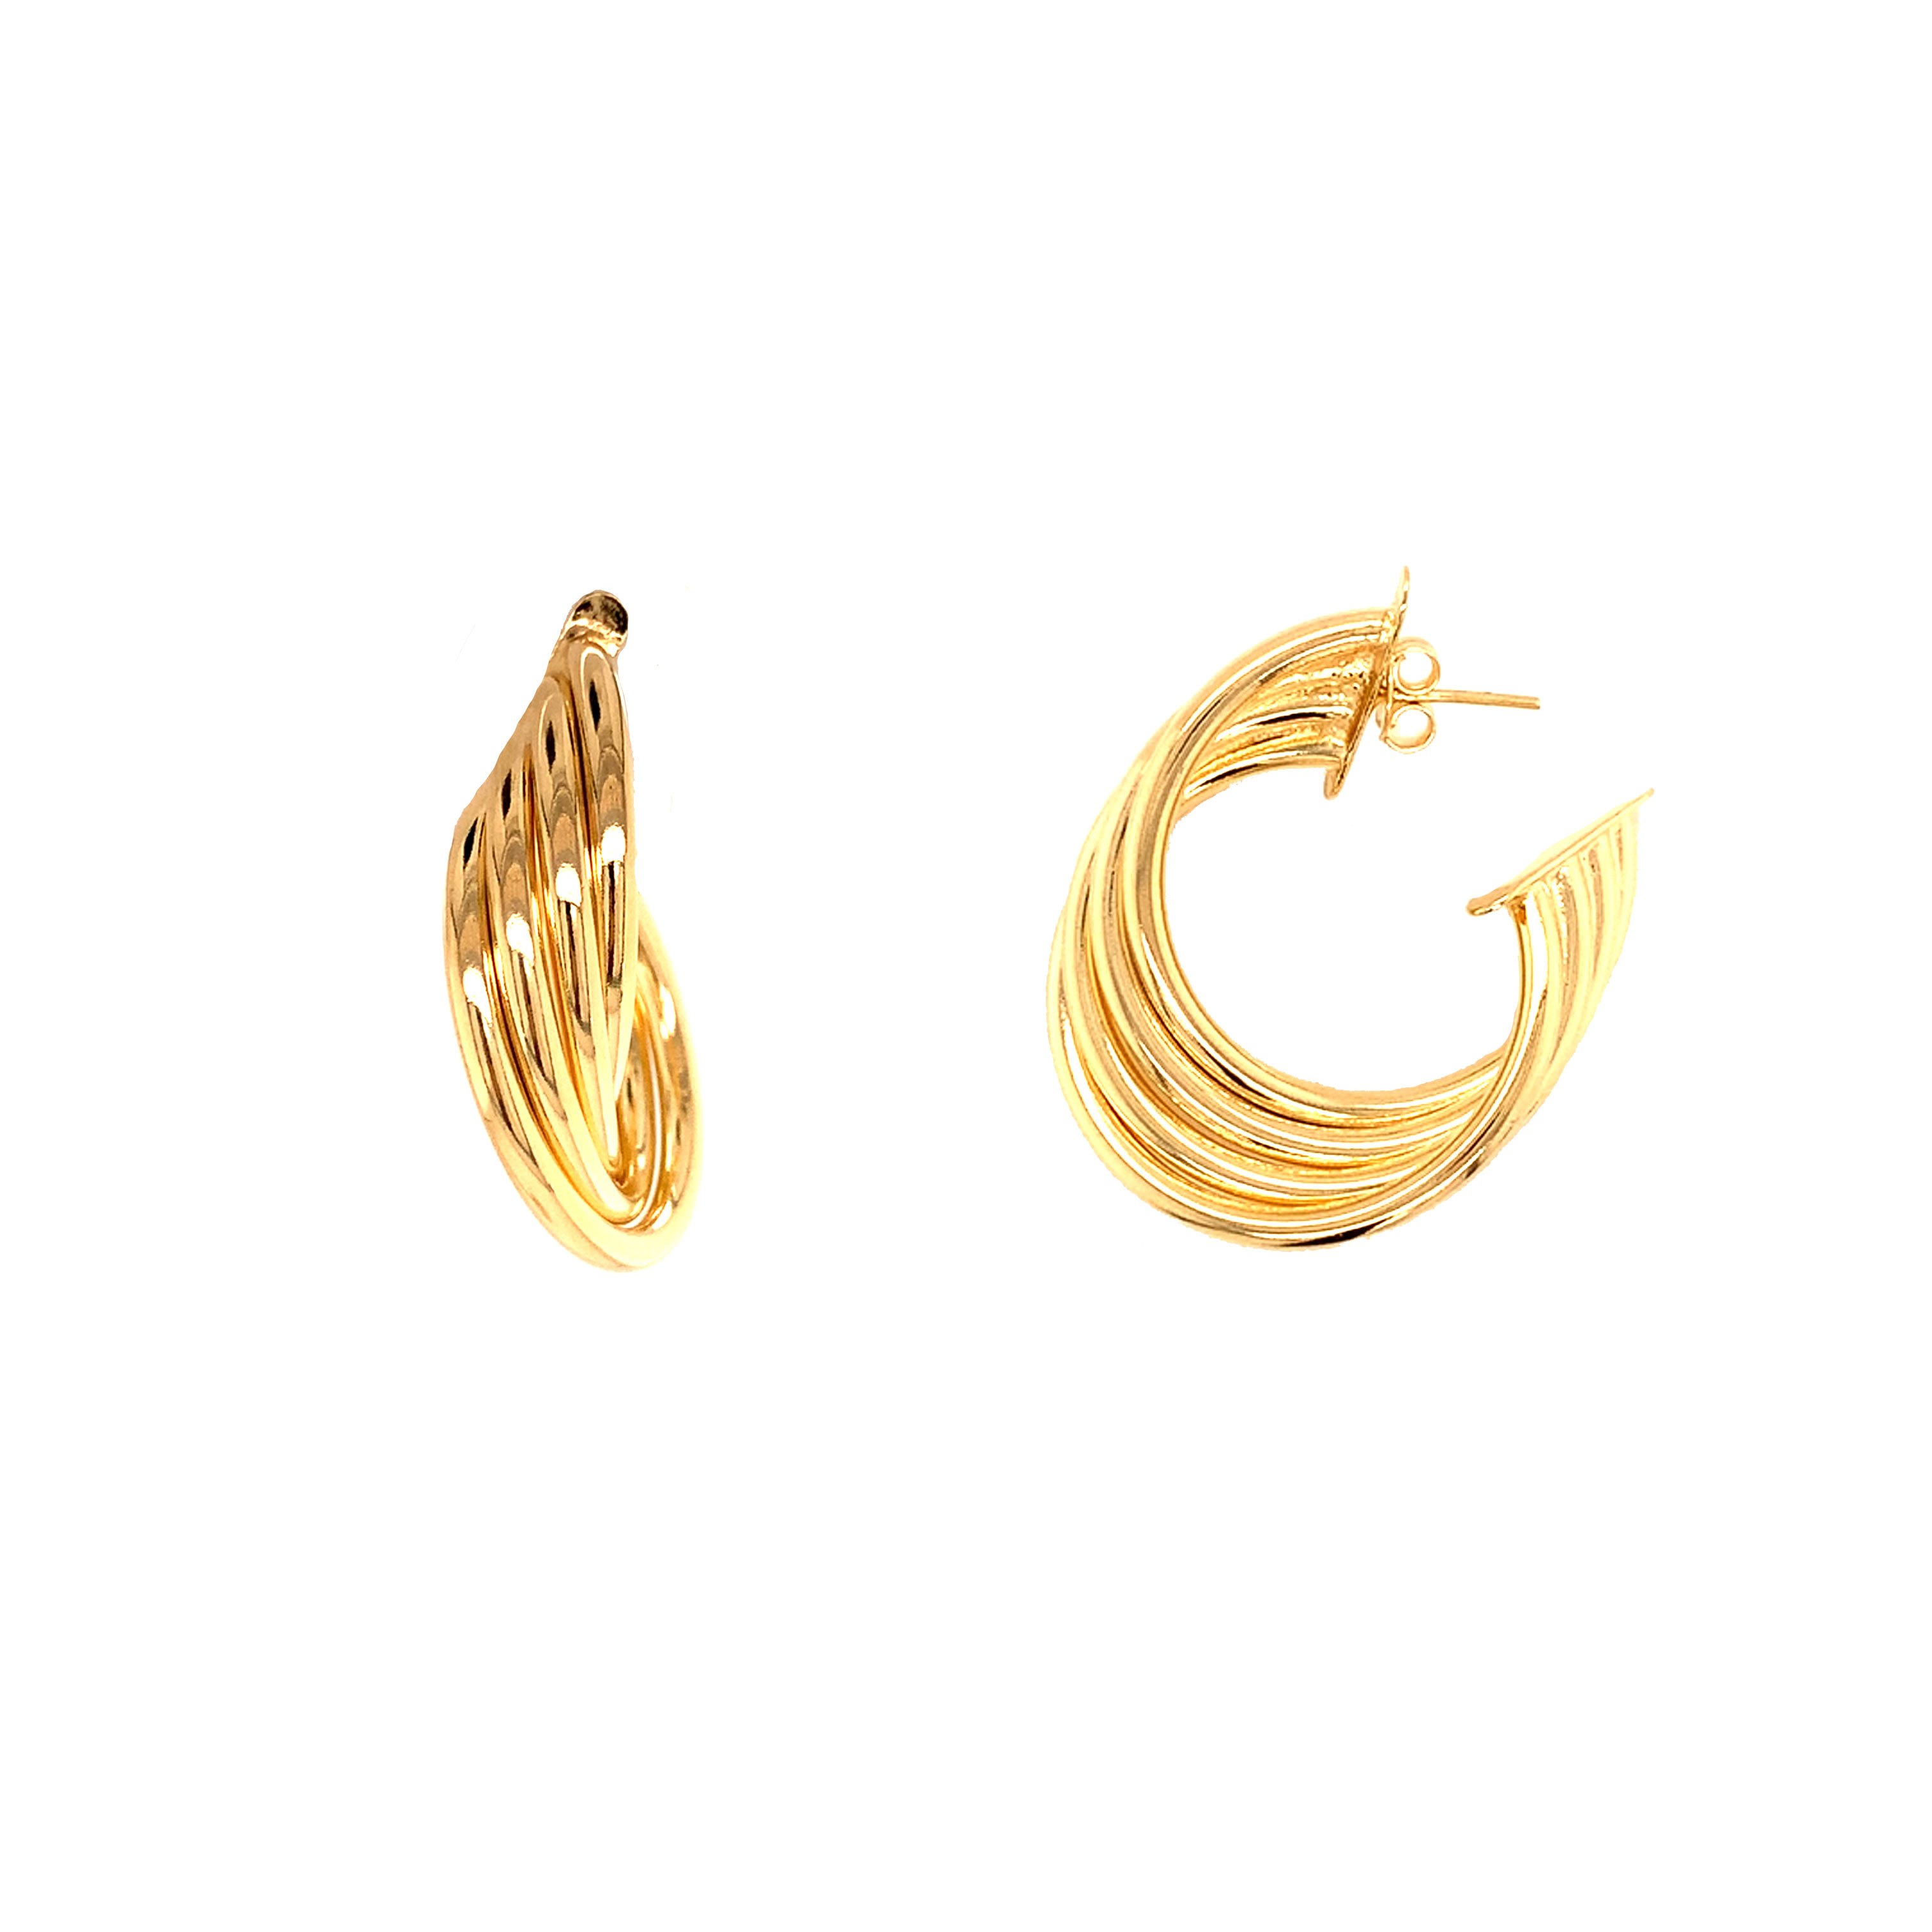 14mm x 35mm 4 Looped Hoop - Gold Filled